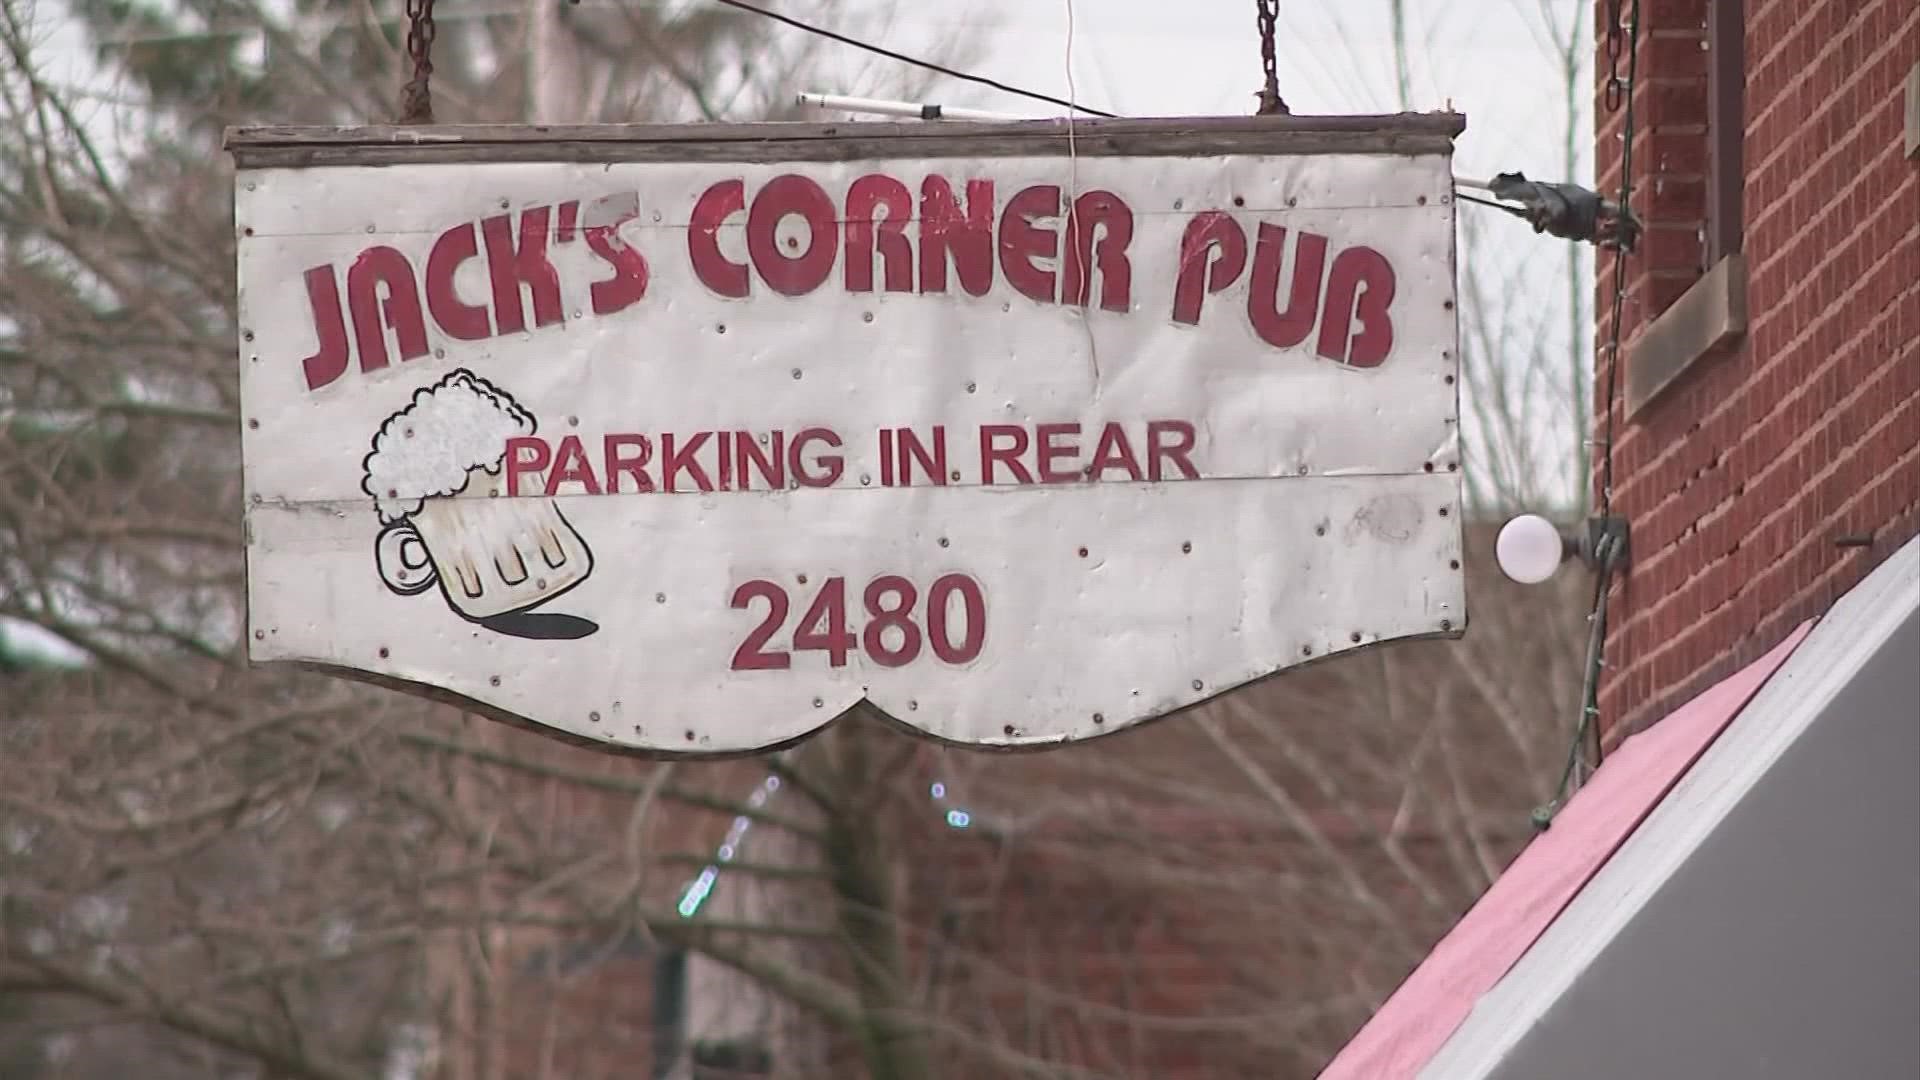 The owner of Jack's Corner Pub said he installed 13 security cameras inside and outside of the bar. He is also closing at 1 a.m. during the week.